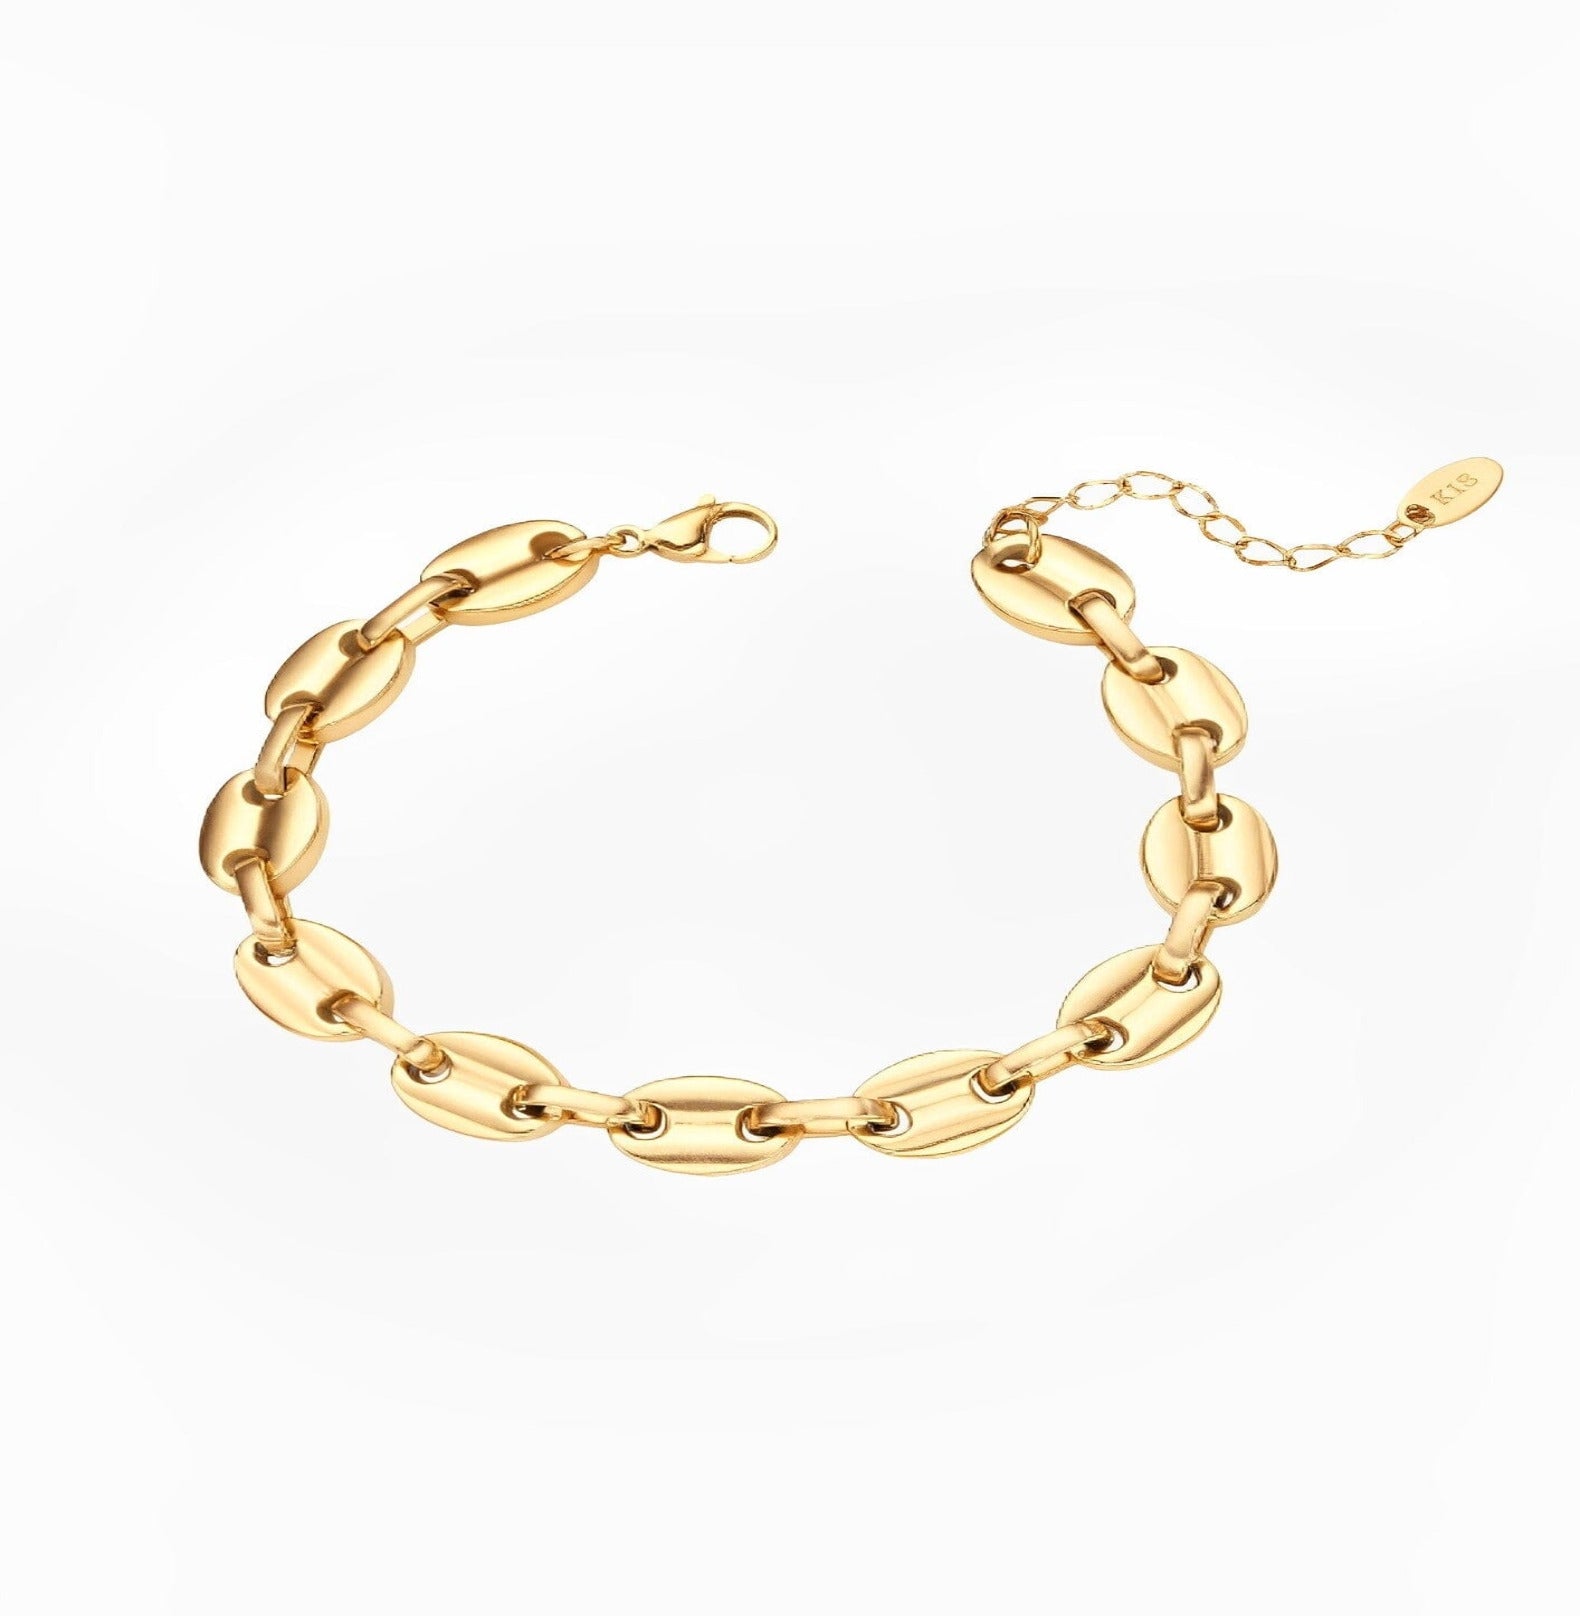 COFEE BRACELET braclet Yubama Jewelry Online Store - The Elegant Designs of Gold and Silver ! 